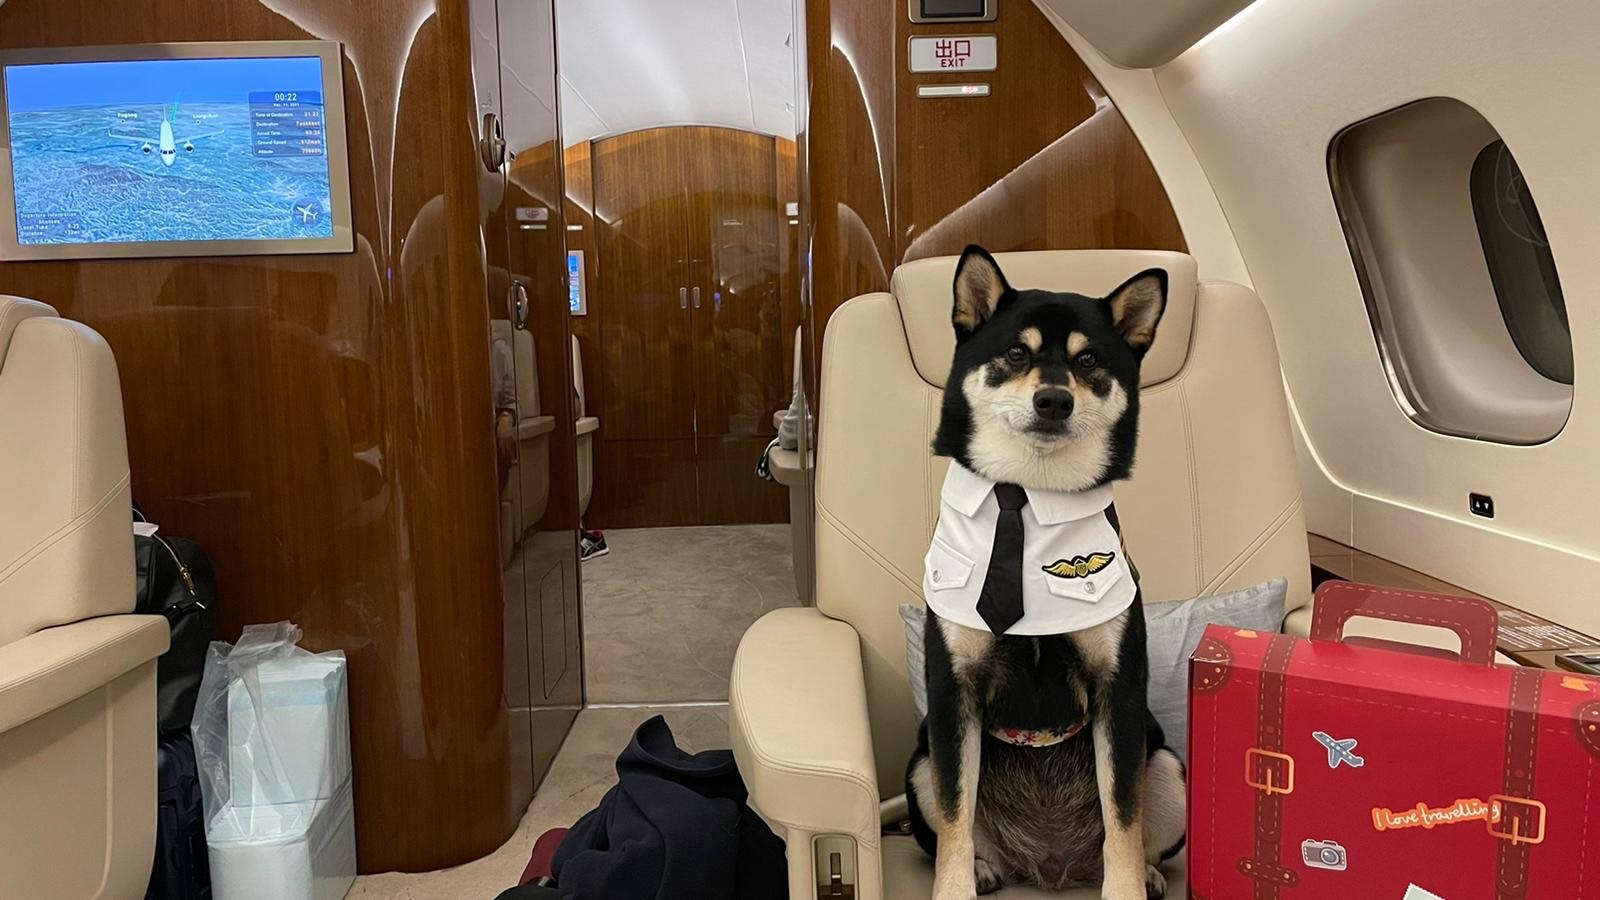 Departing Hong Kong residents fly their pets out of city on private jets |  Financial Times